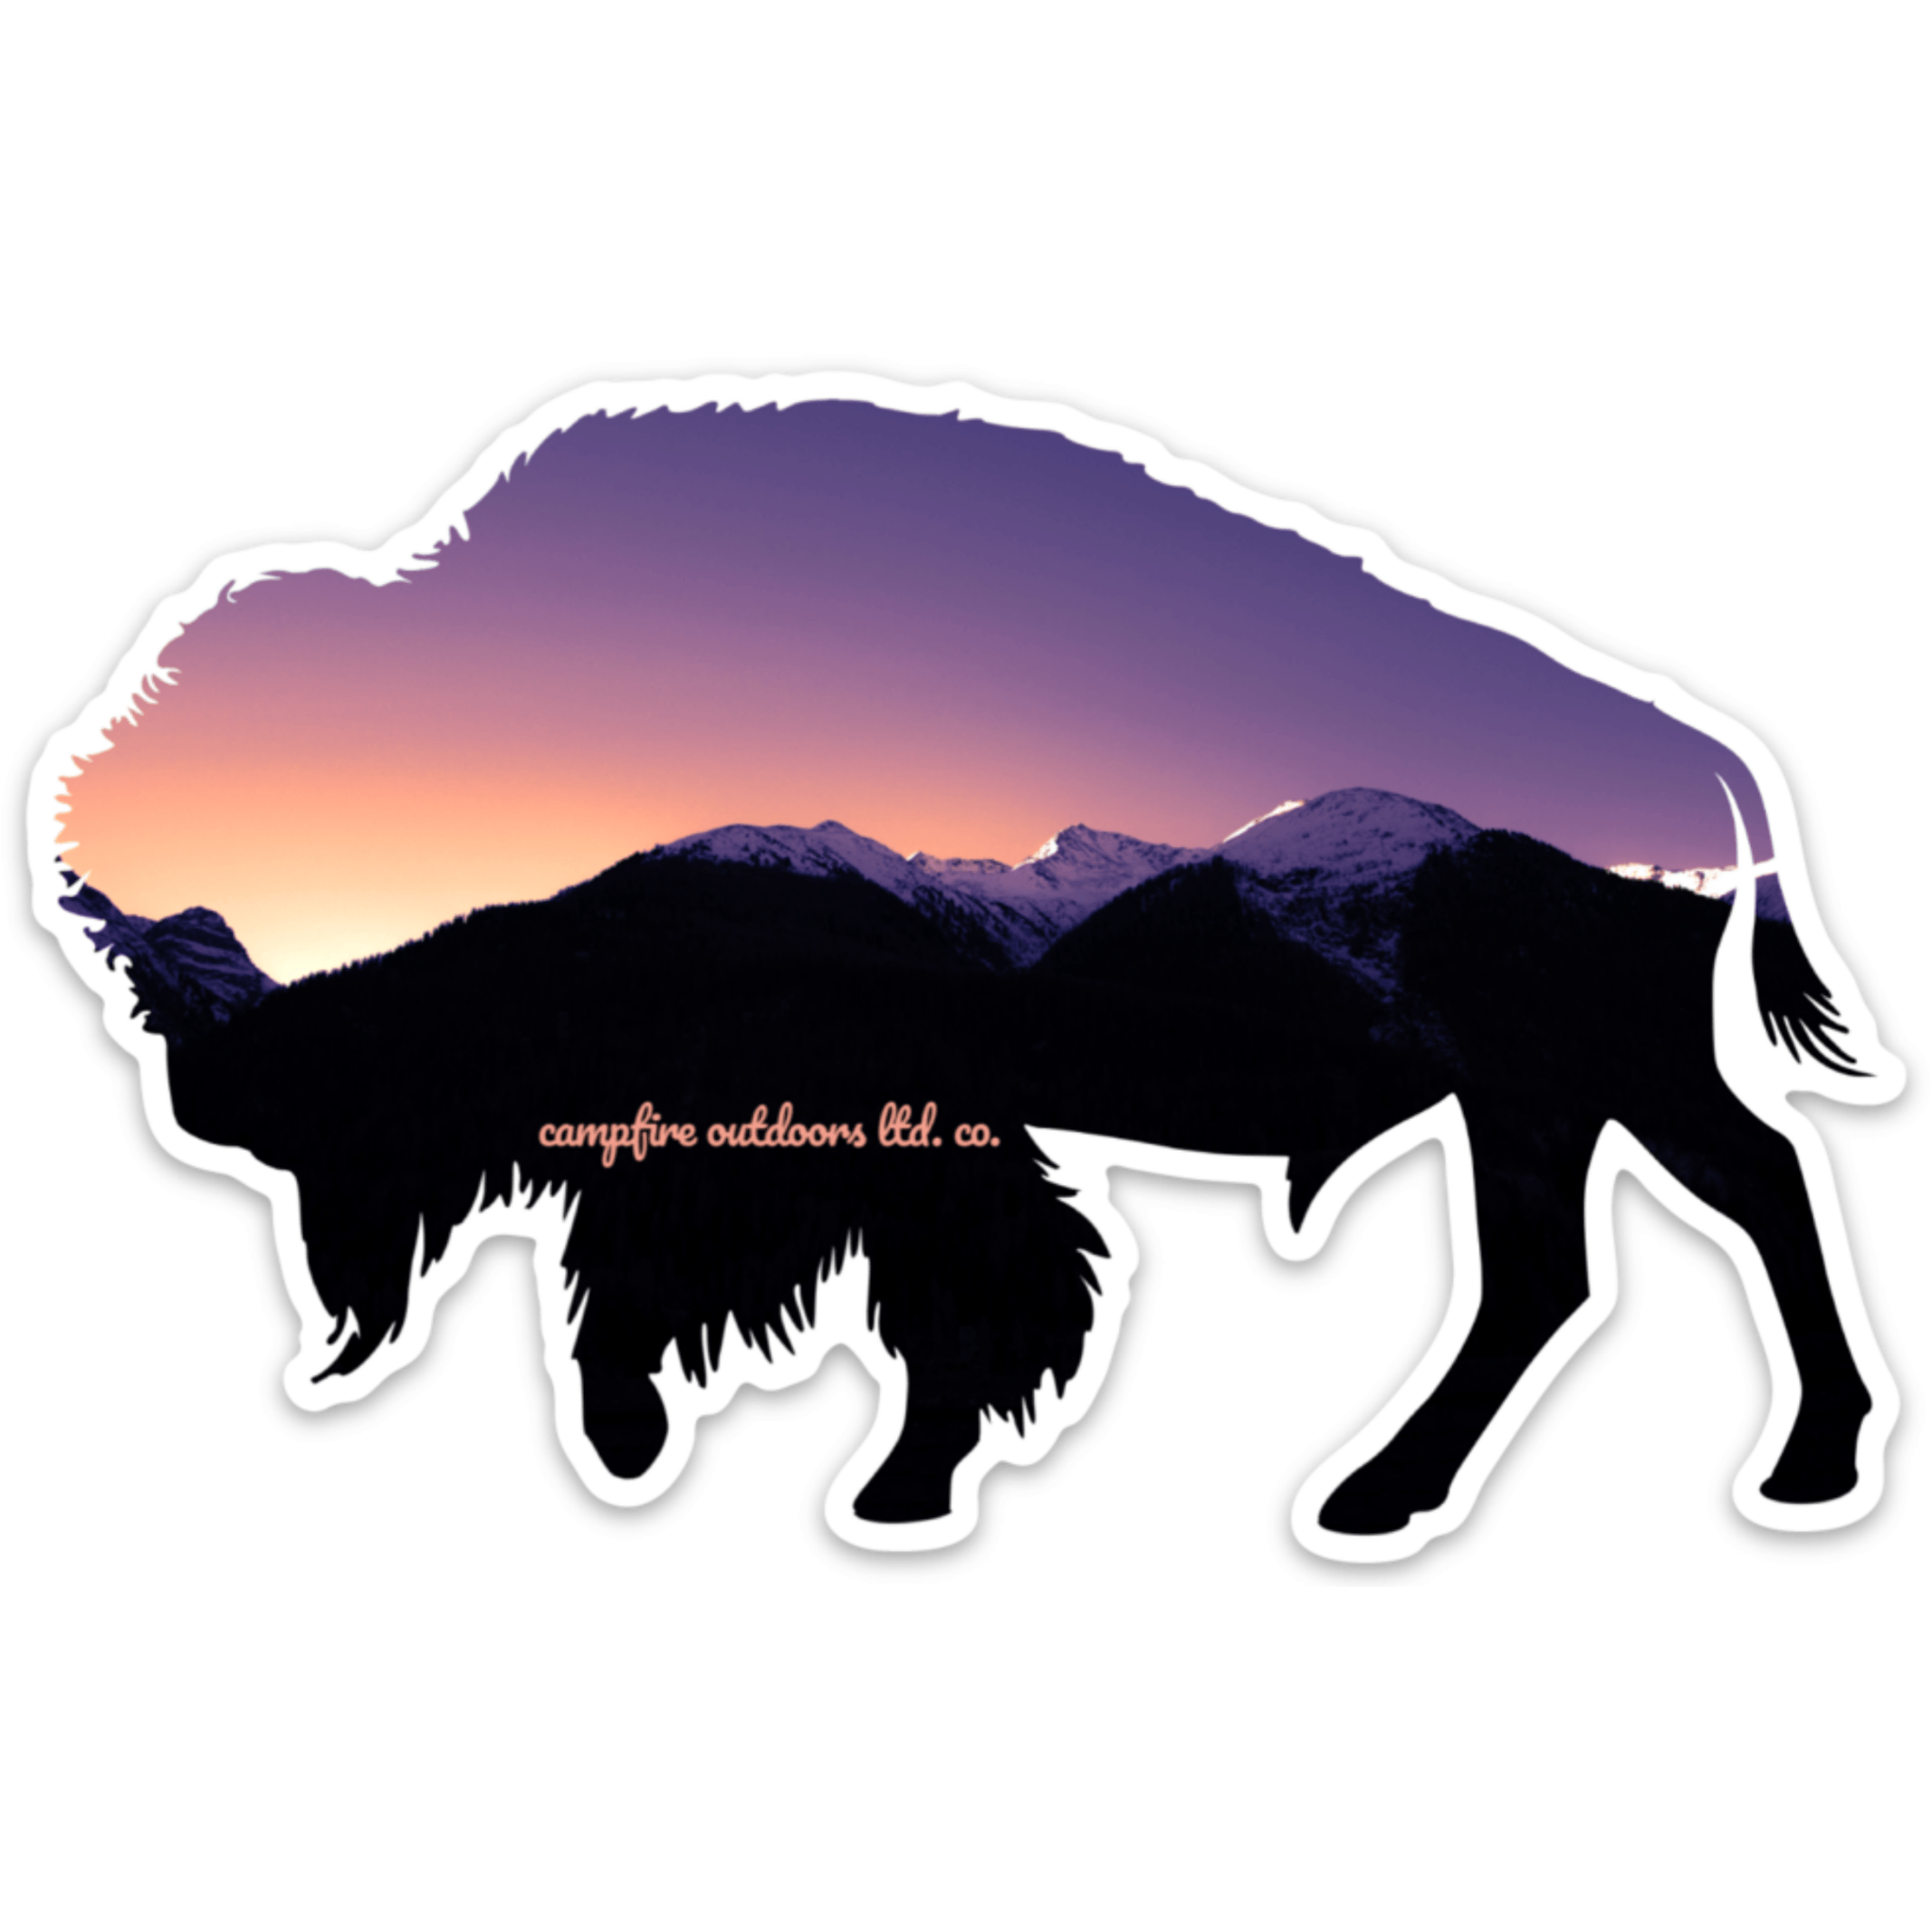 Sunset Bison Logo - Sunset Bison (5 in. x 3.17 in.) Outdoors Ltd. Co